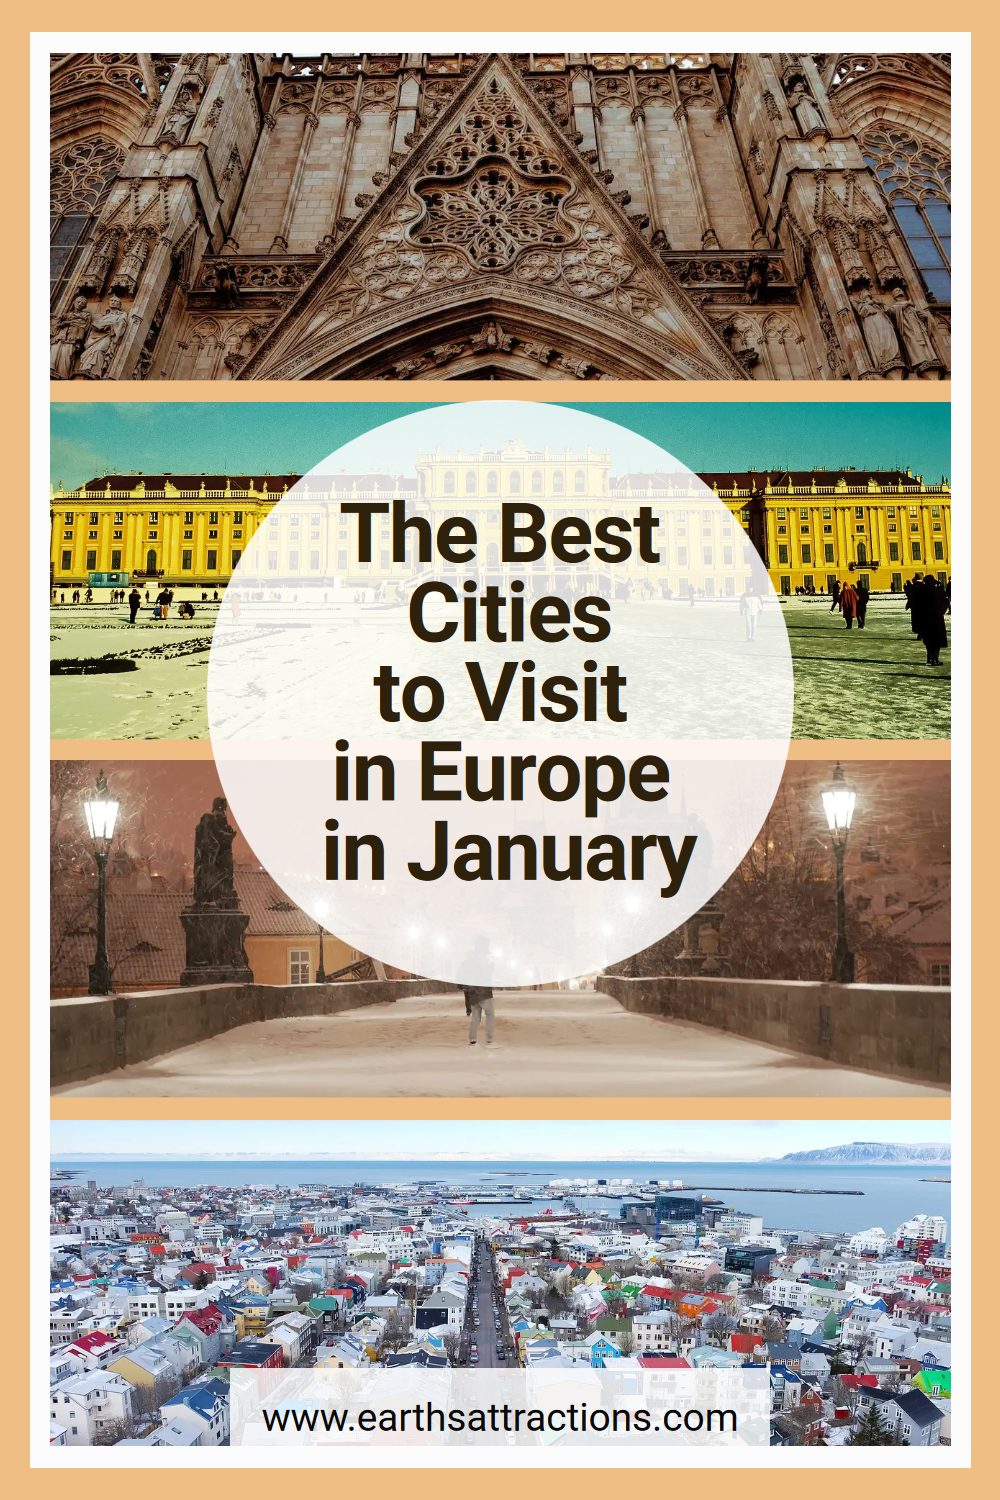 The best cities to visit in Europe in January. Wondering where to go in in January Europe? Discover the best European travel destinations for January. #europe #travel #europetravel #january #traveldestinations #placestogo #januarytravel